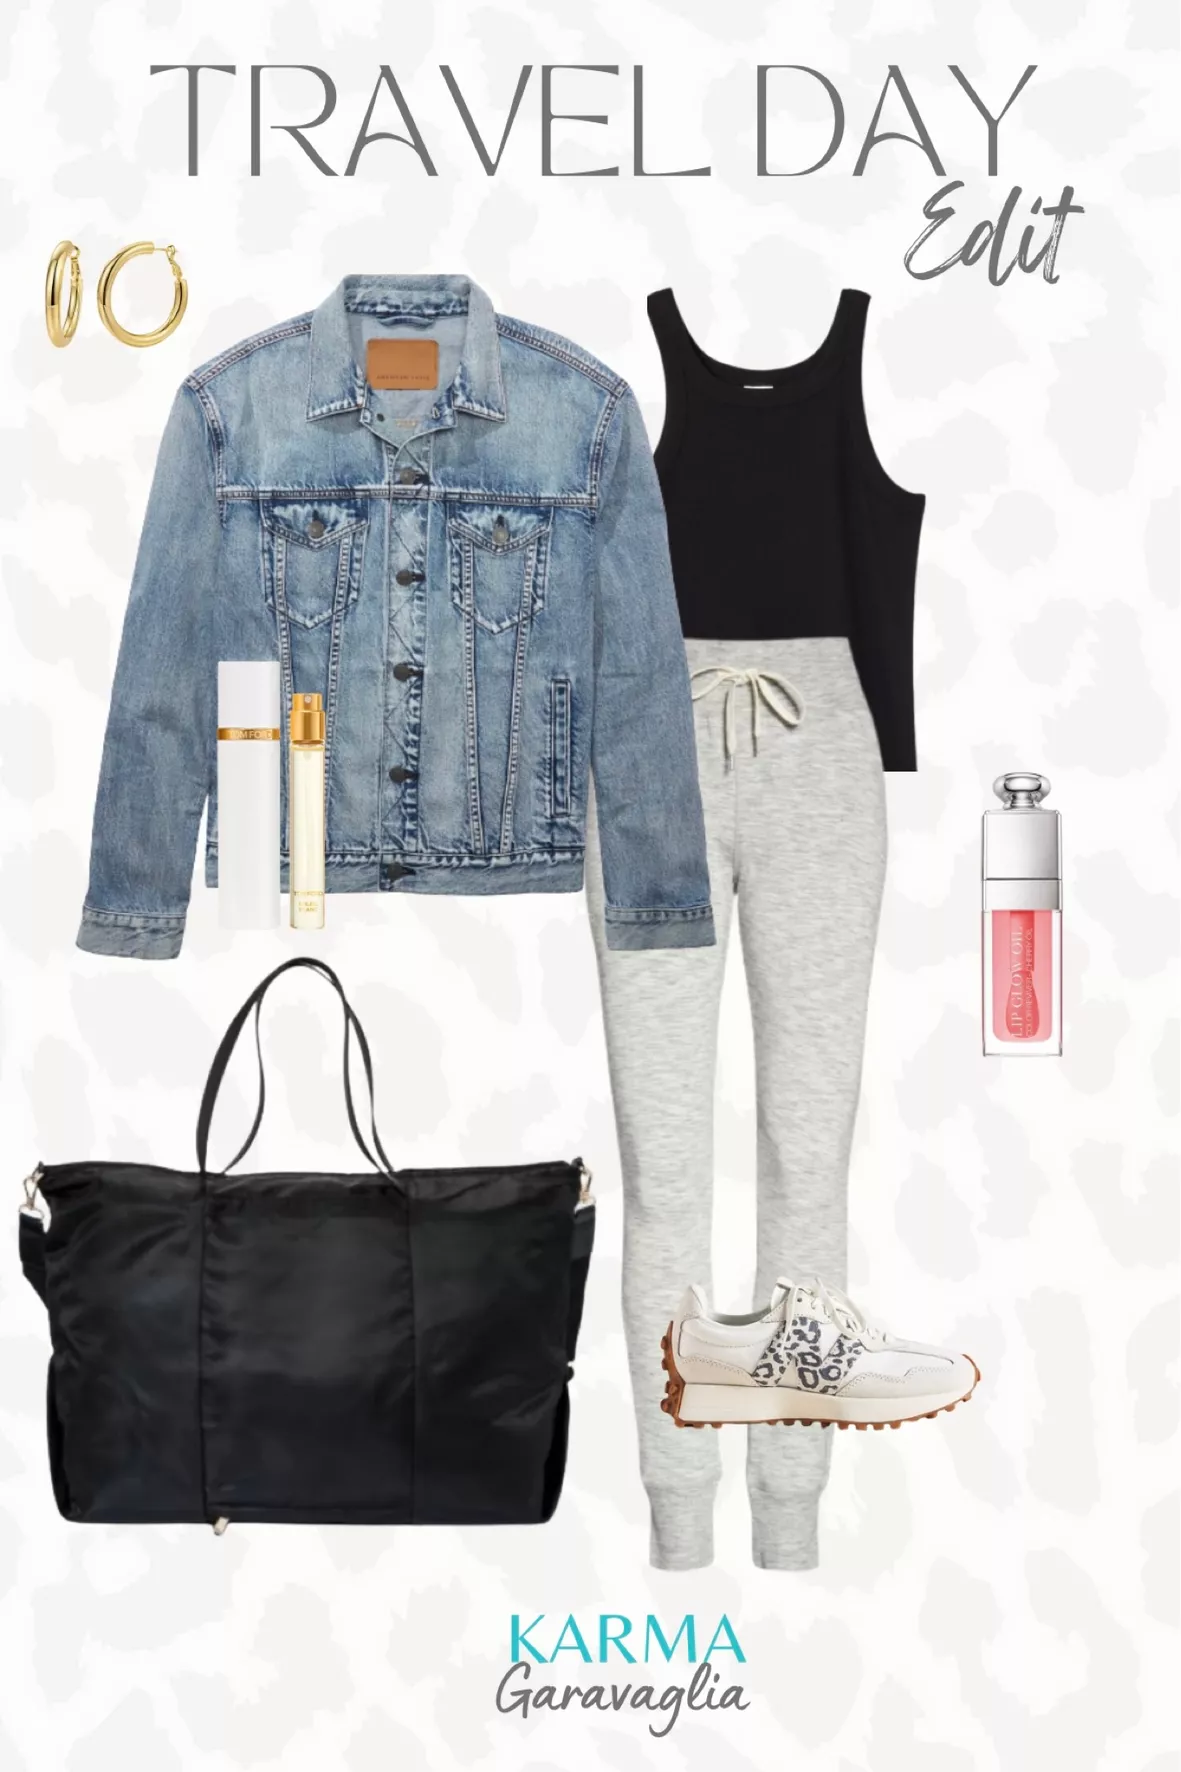 🔗 in B, 0. Airport travel outfit ideas #ltkstyle #ltkfashion #ltkstyle